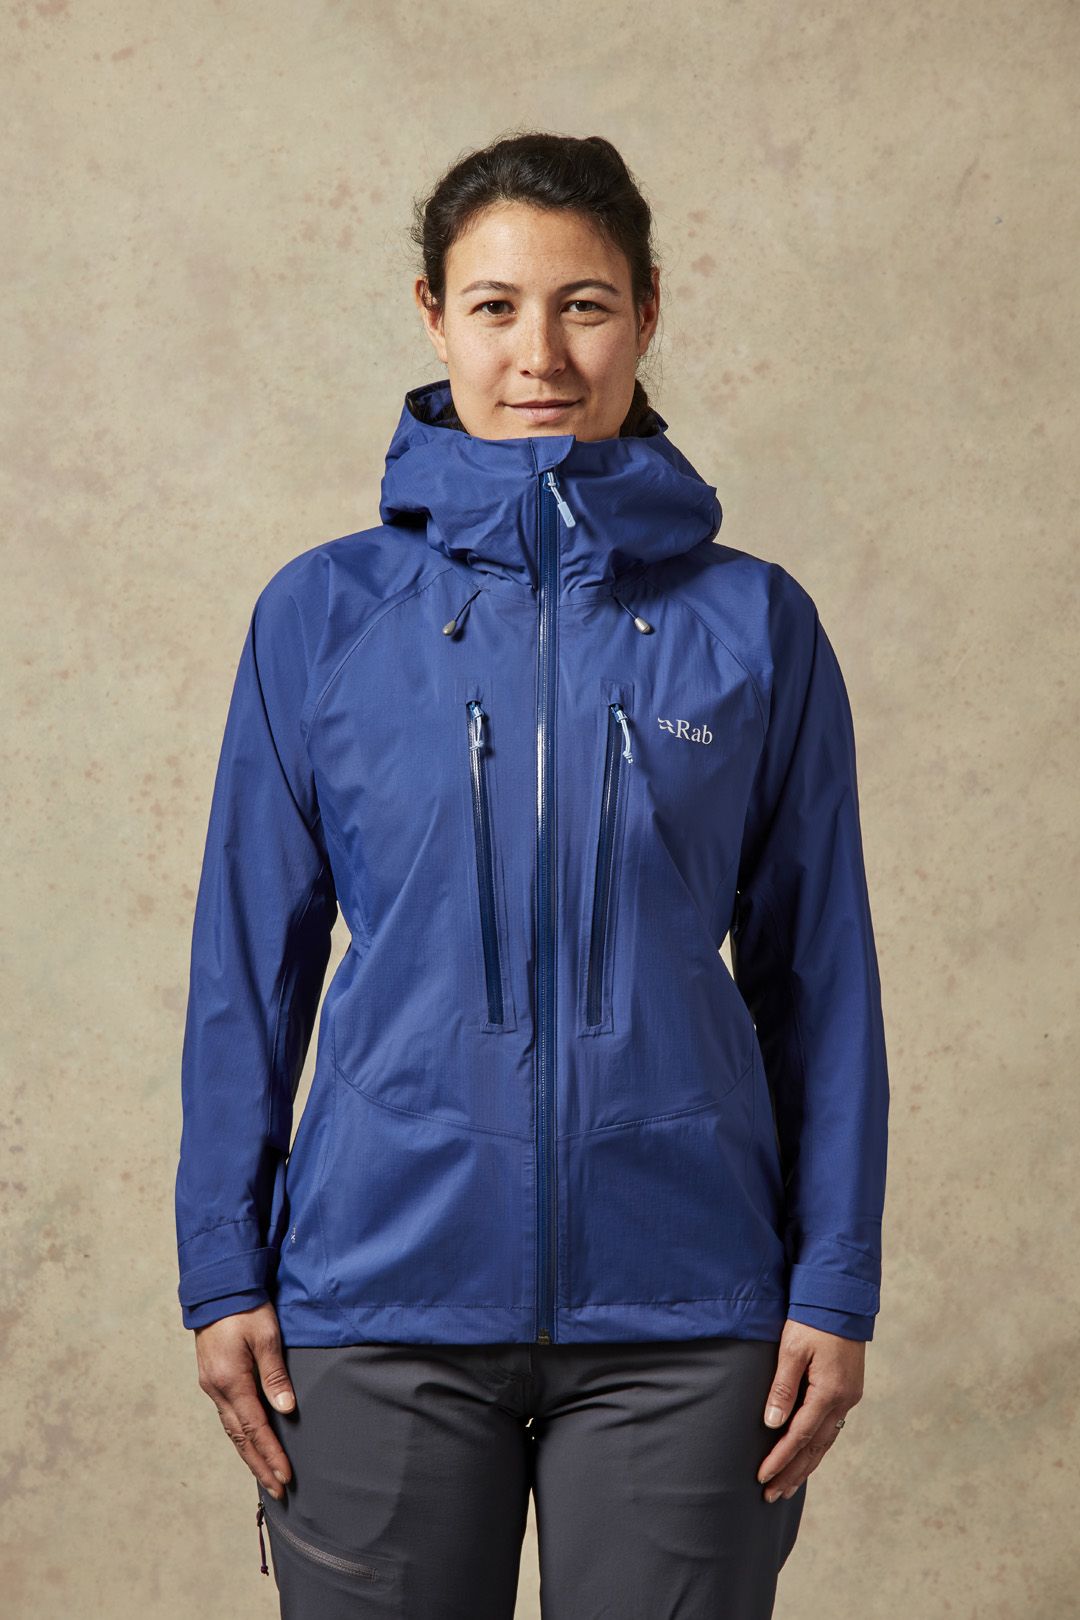 Rab - Downpour Alpine Jacket - Chaqueta impermeable - Mujer